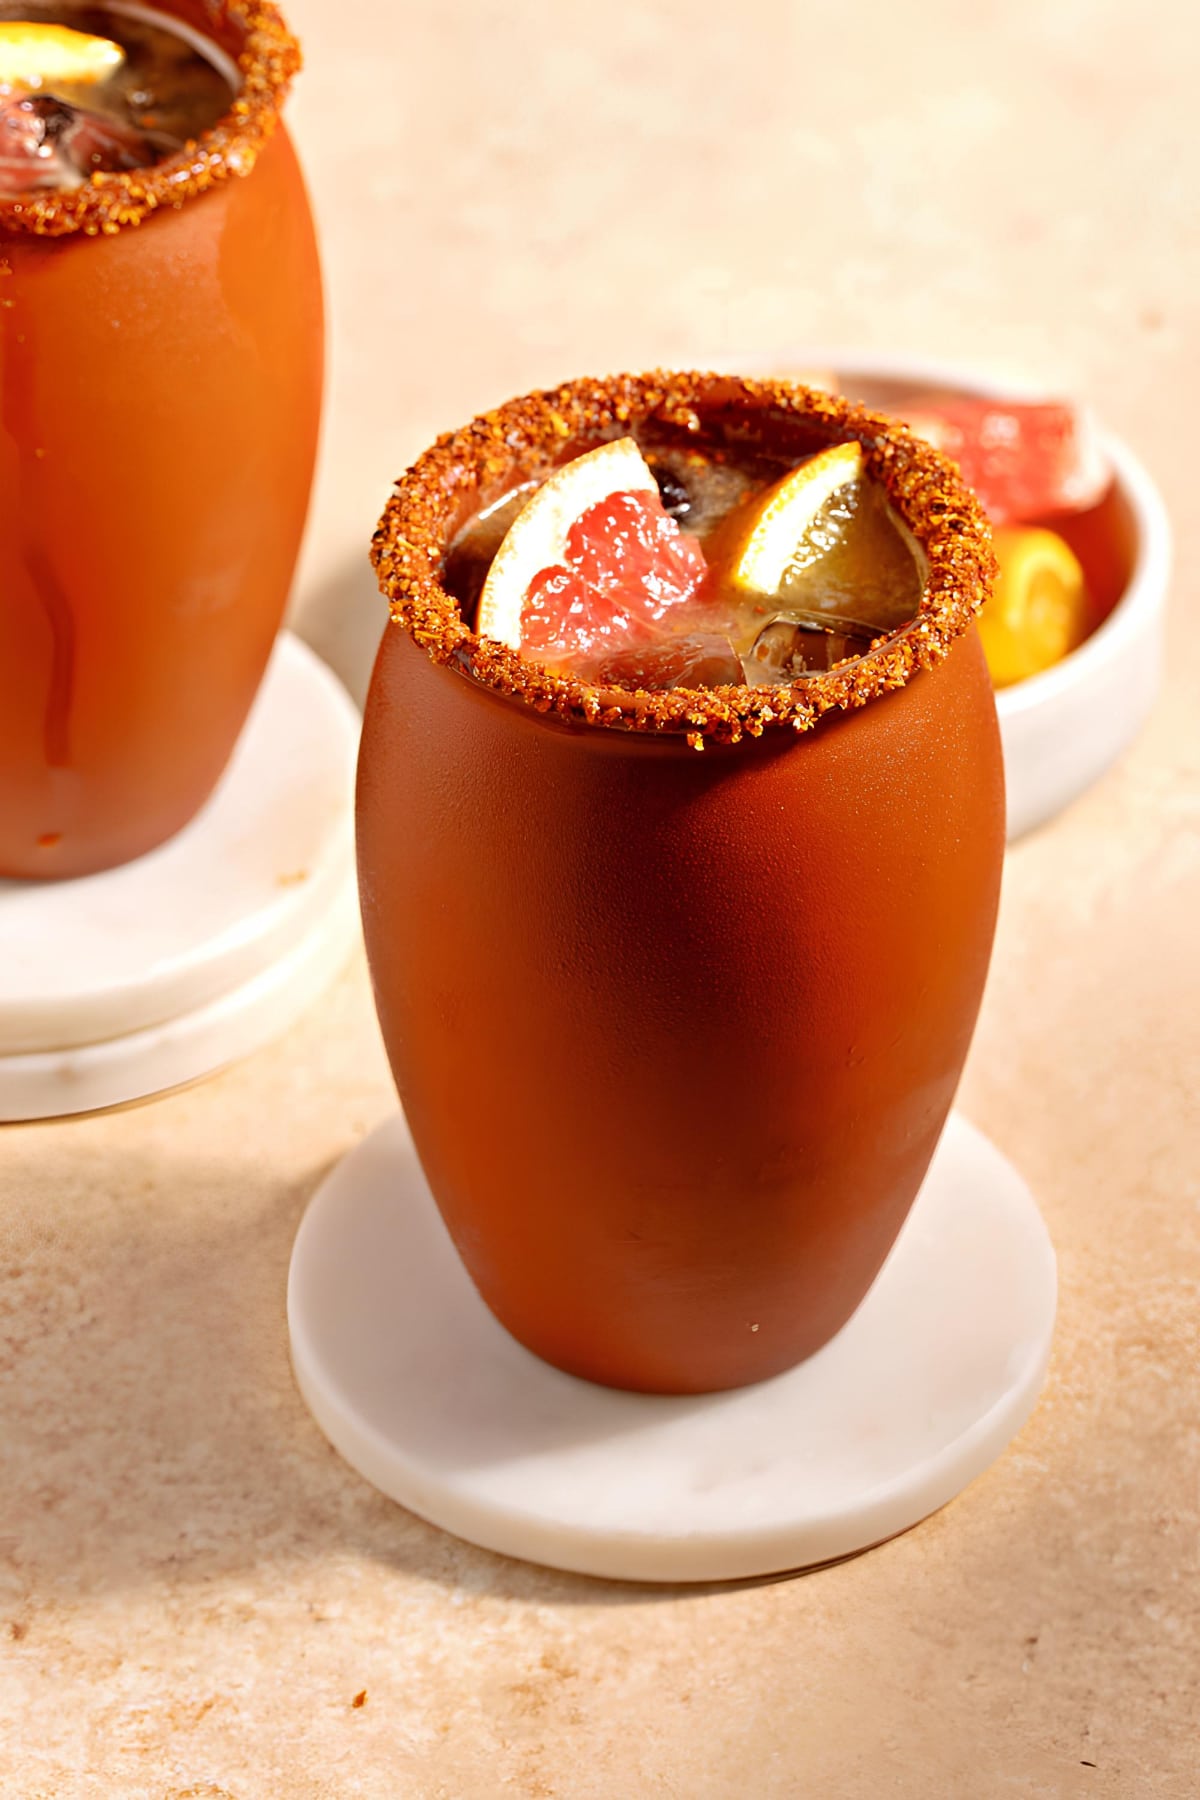 Cantarito Cocktail Recipe: served on a Cantarito clay dipped in tajin on rim garnished with sliced grapefruit.